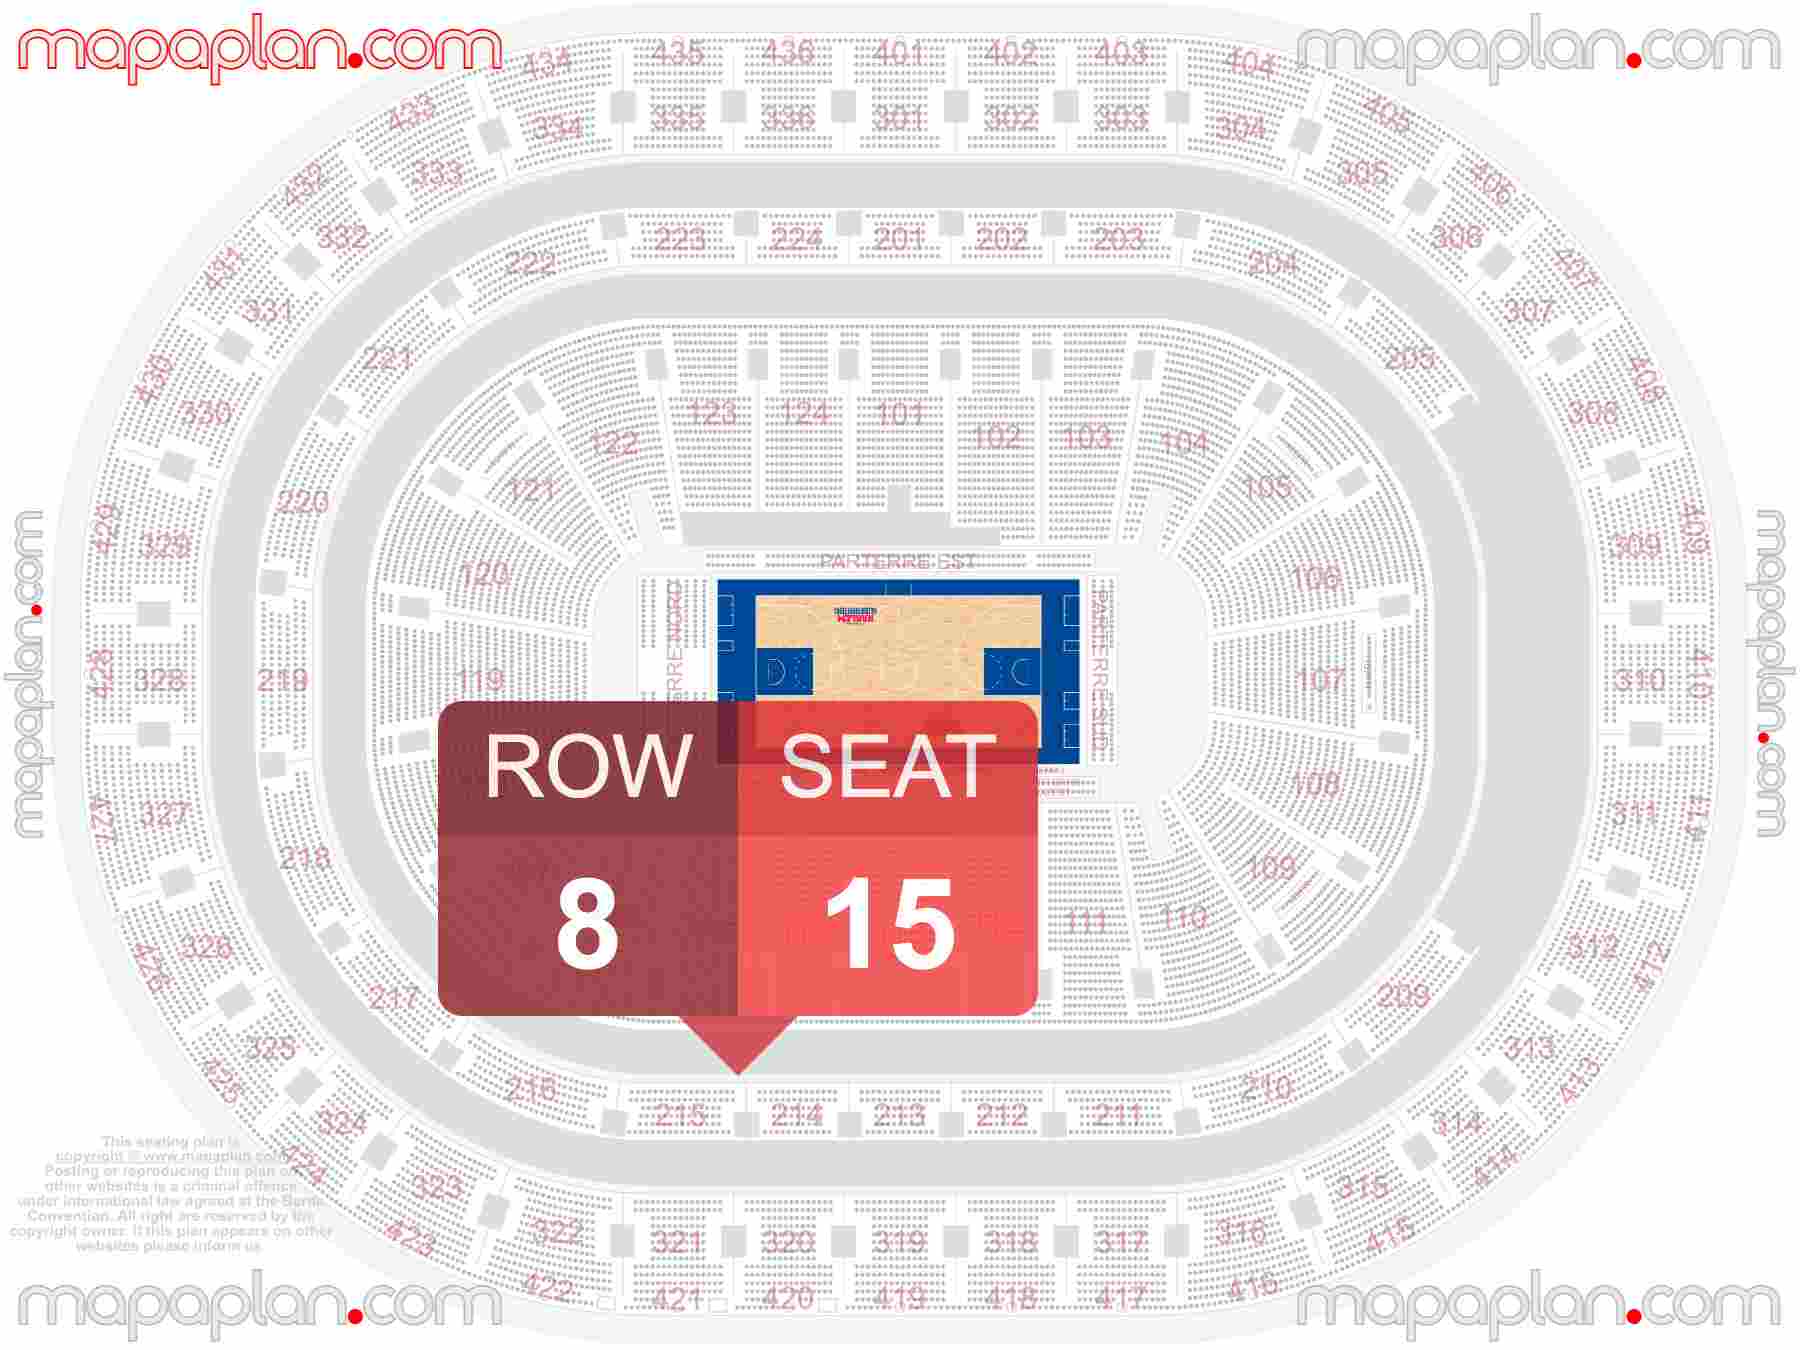 Montreal Bell Centre seating map Basketball find best seats row numbering system chart showing how many seats per row - Individual 'find my seat' virtual locator